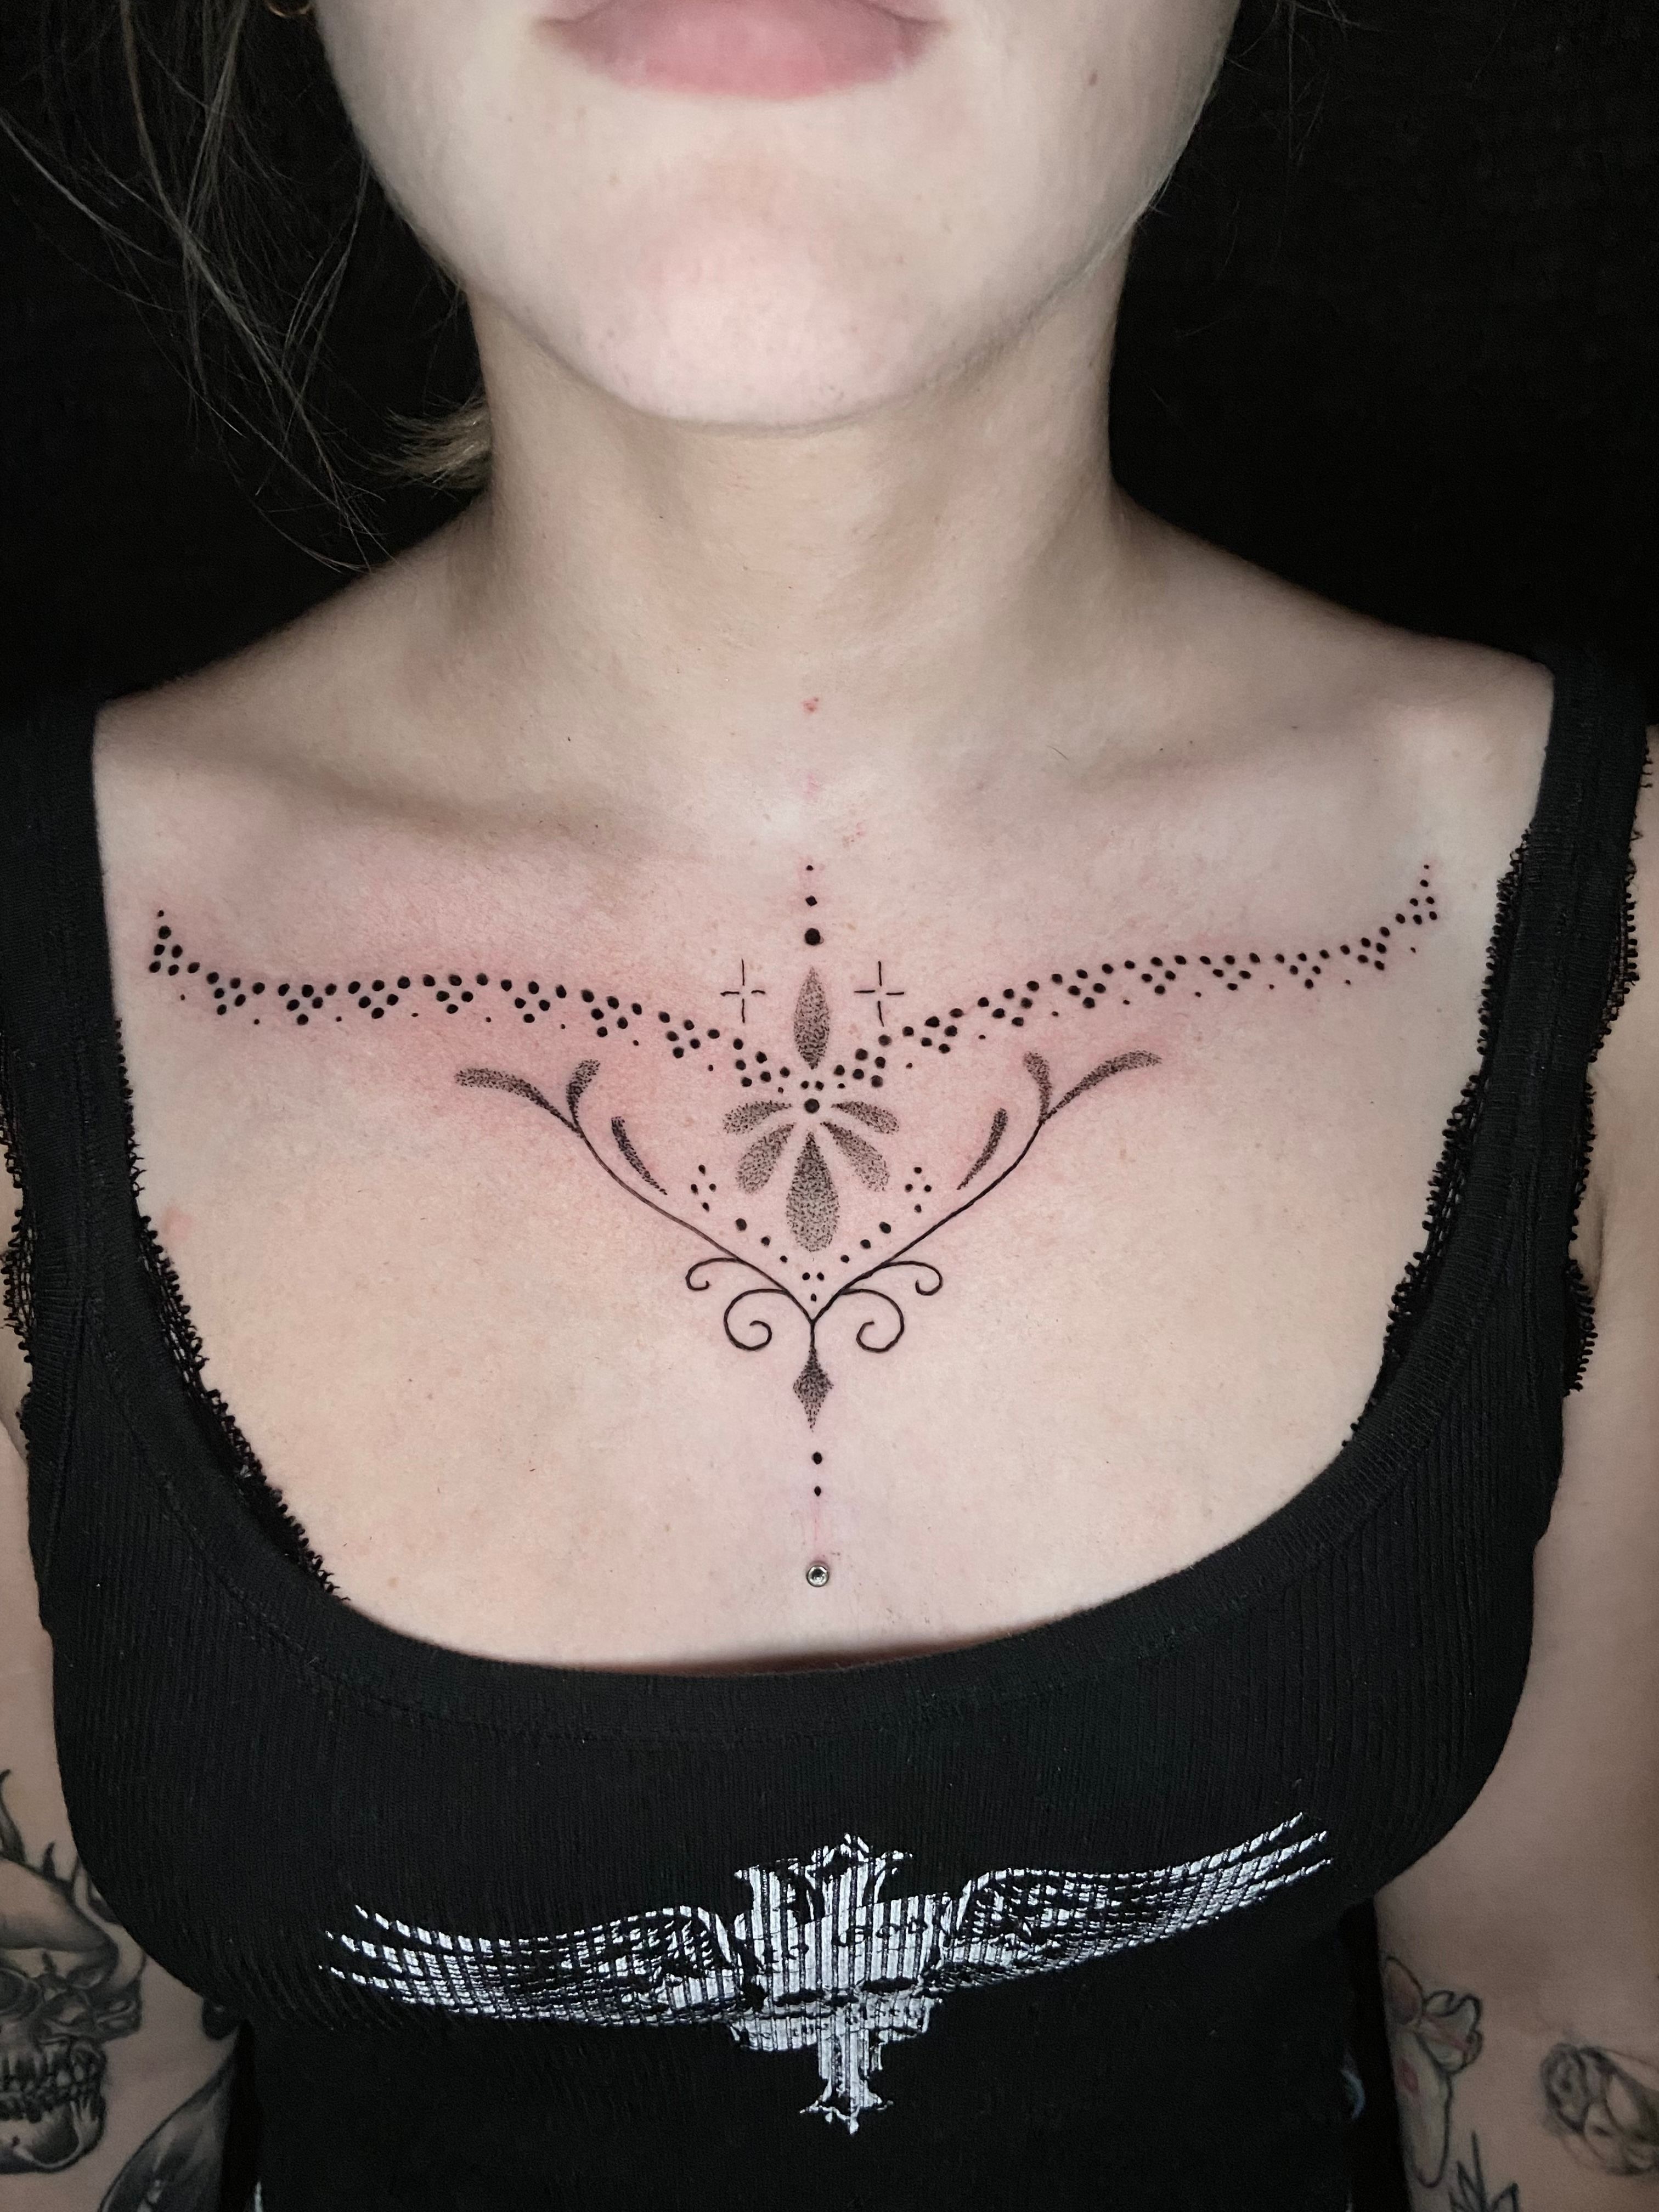 101 Best Chest Tattoo For Women Ideas You'll Have To See To Believe!